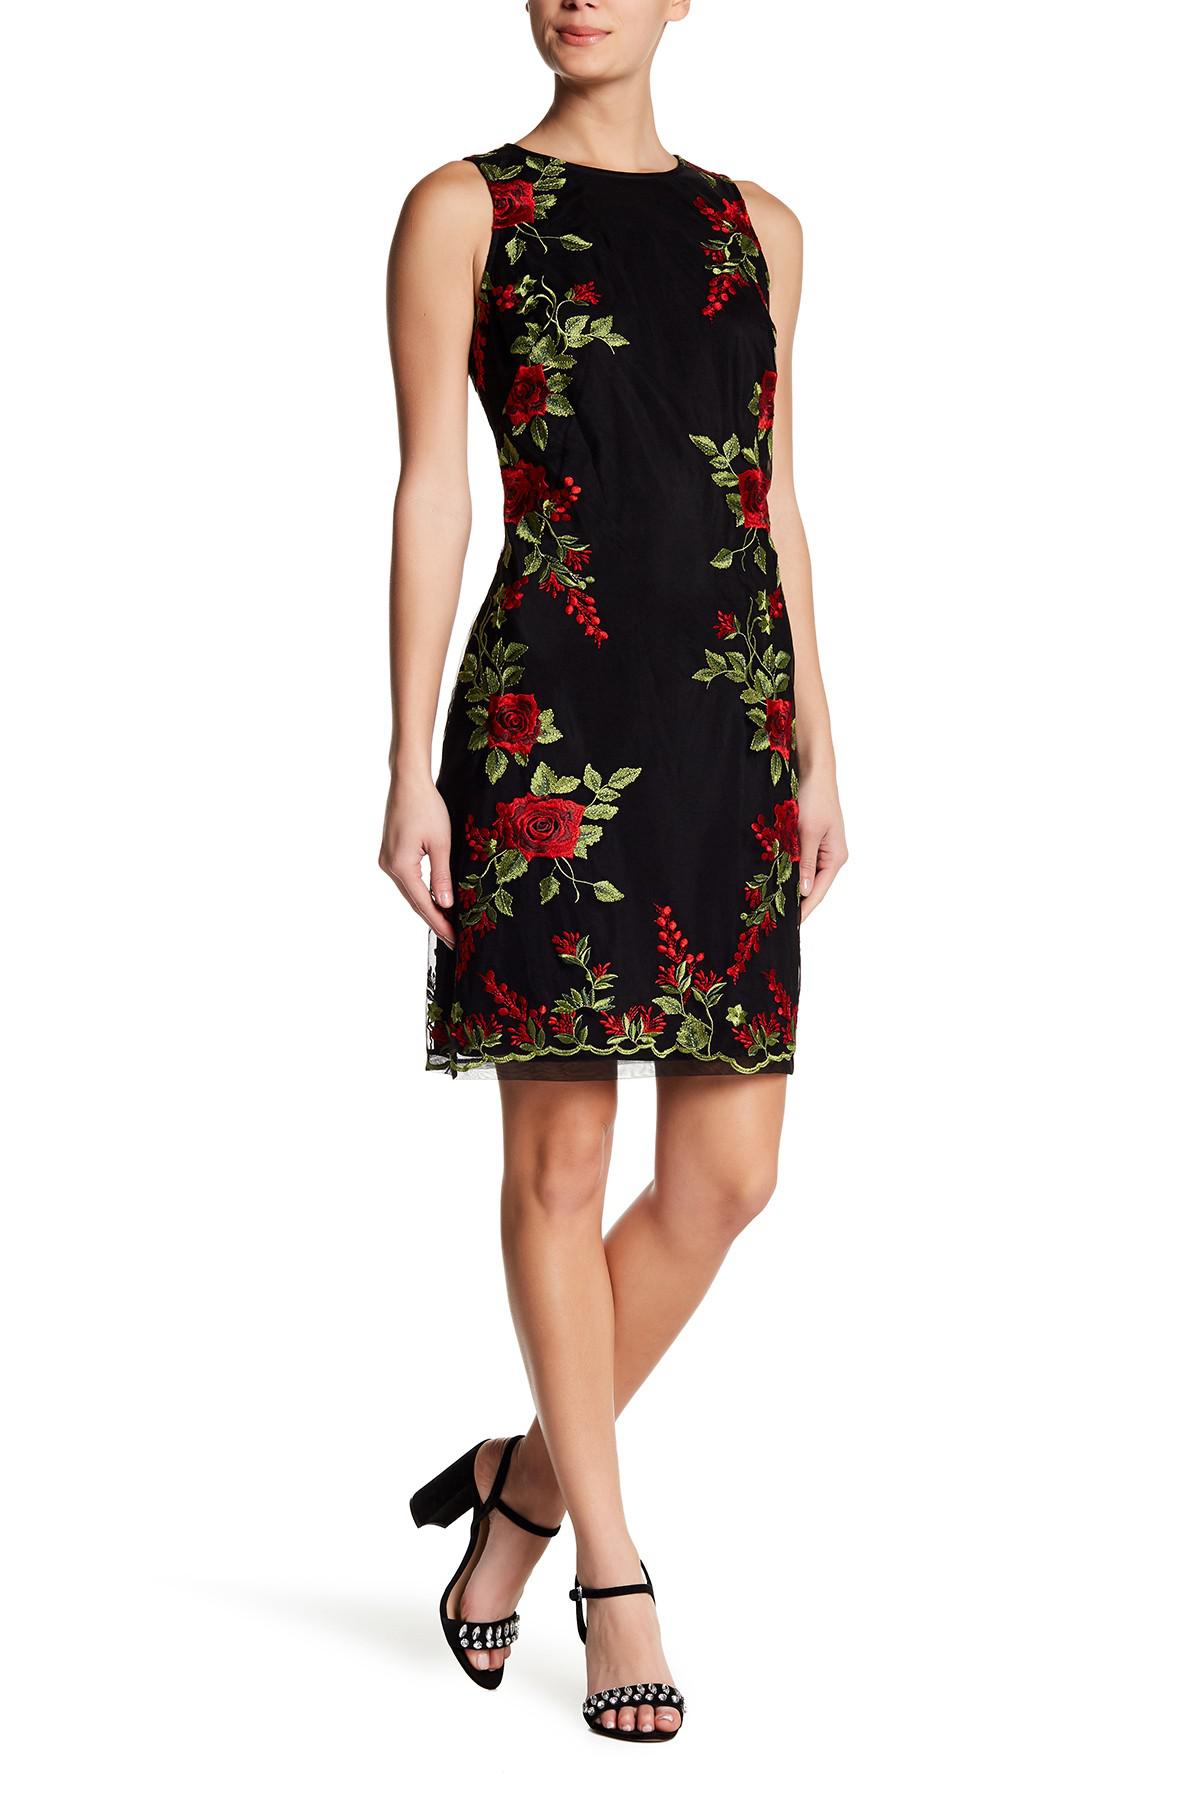 Lyst - Donna ricco Embroidered Floral Sleeveless Dress in Black